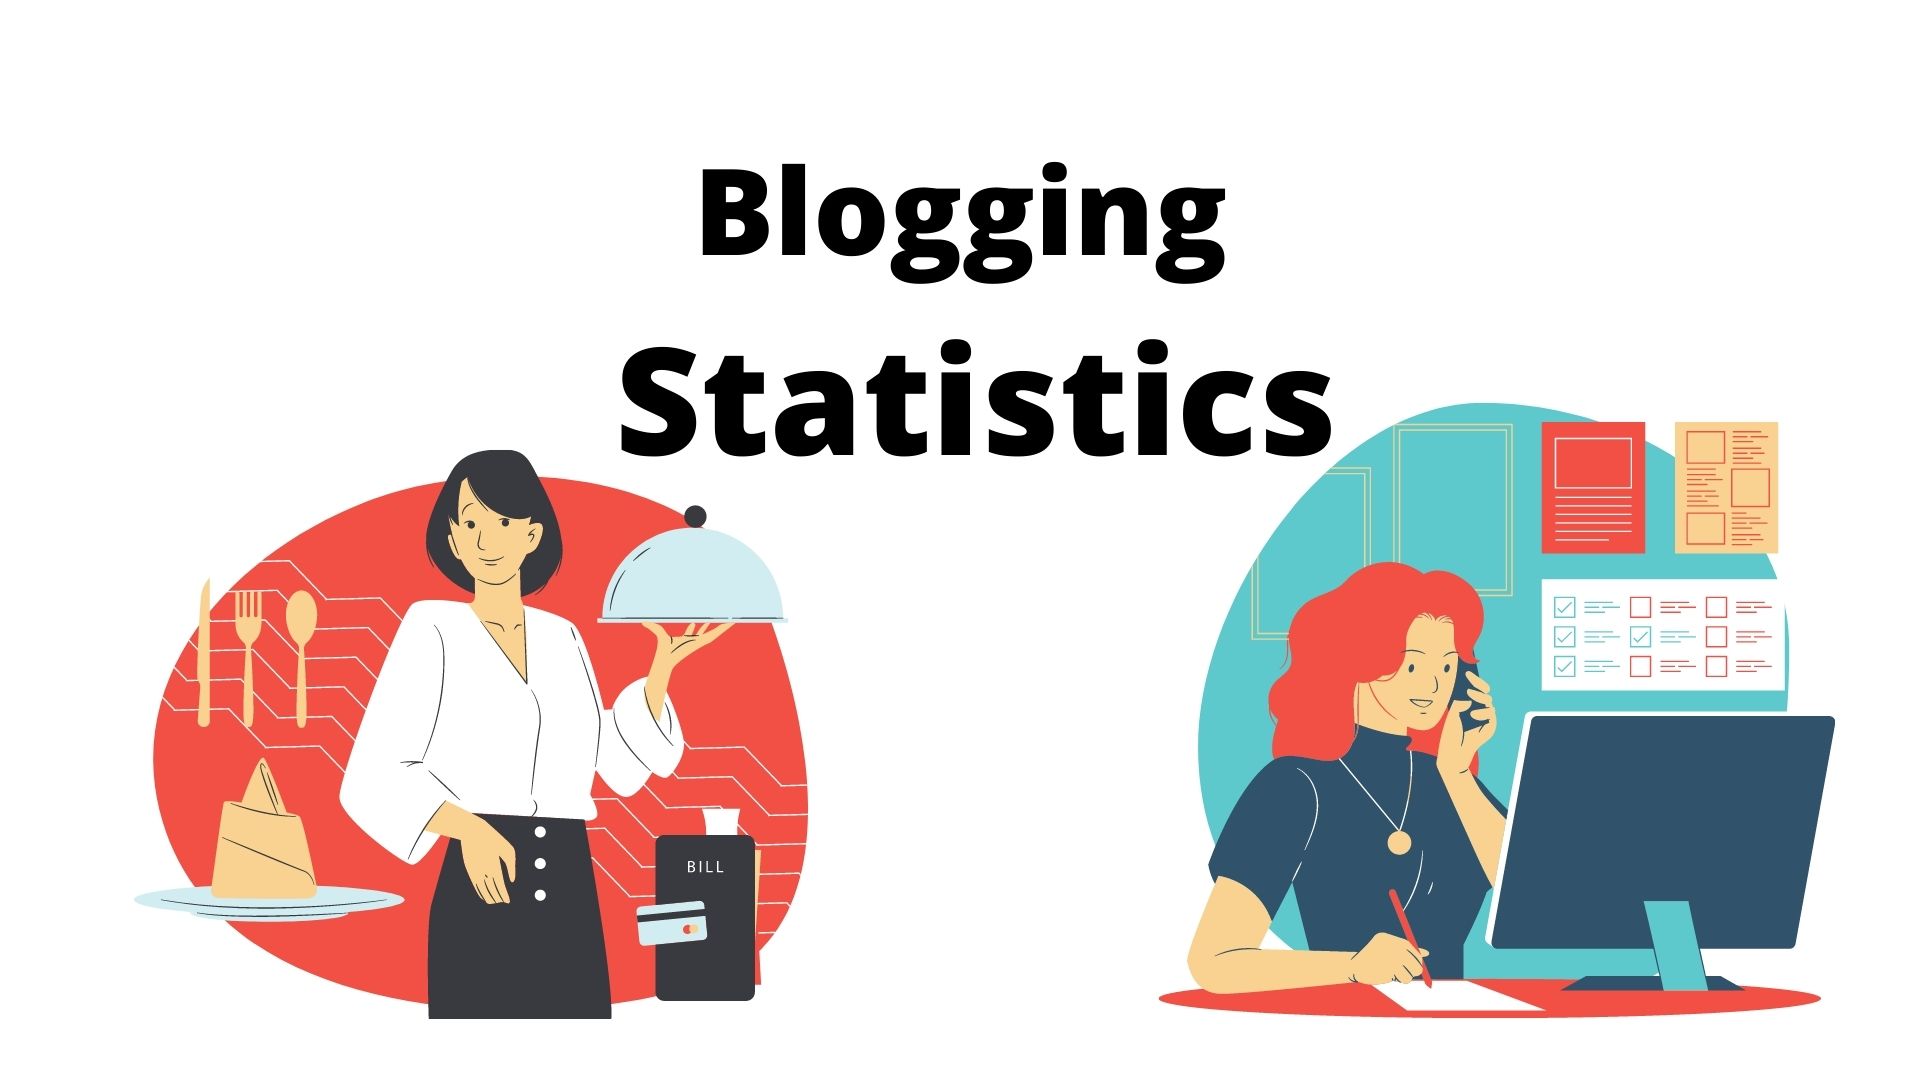 40+ Amazing Blogging Statistics, Facts, and Trends for 2022